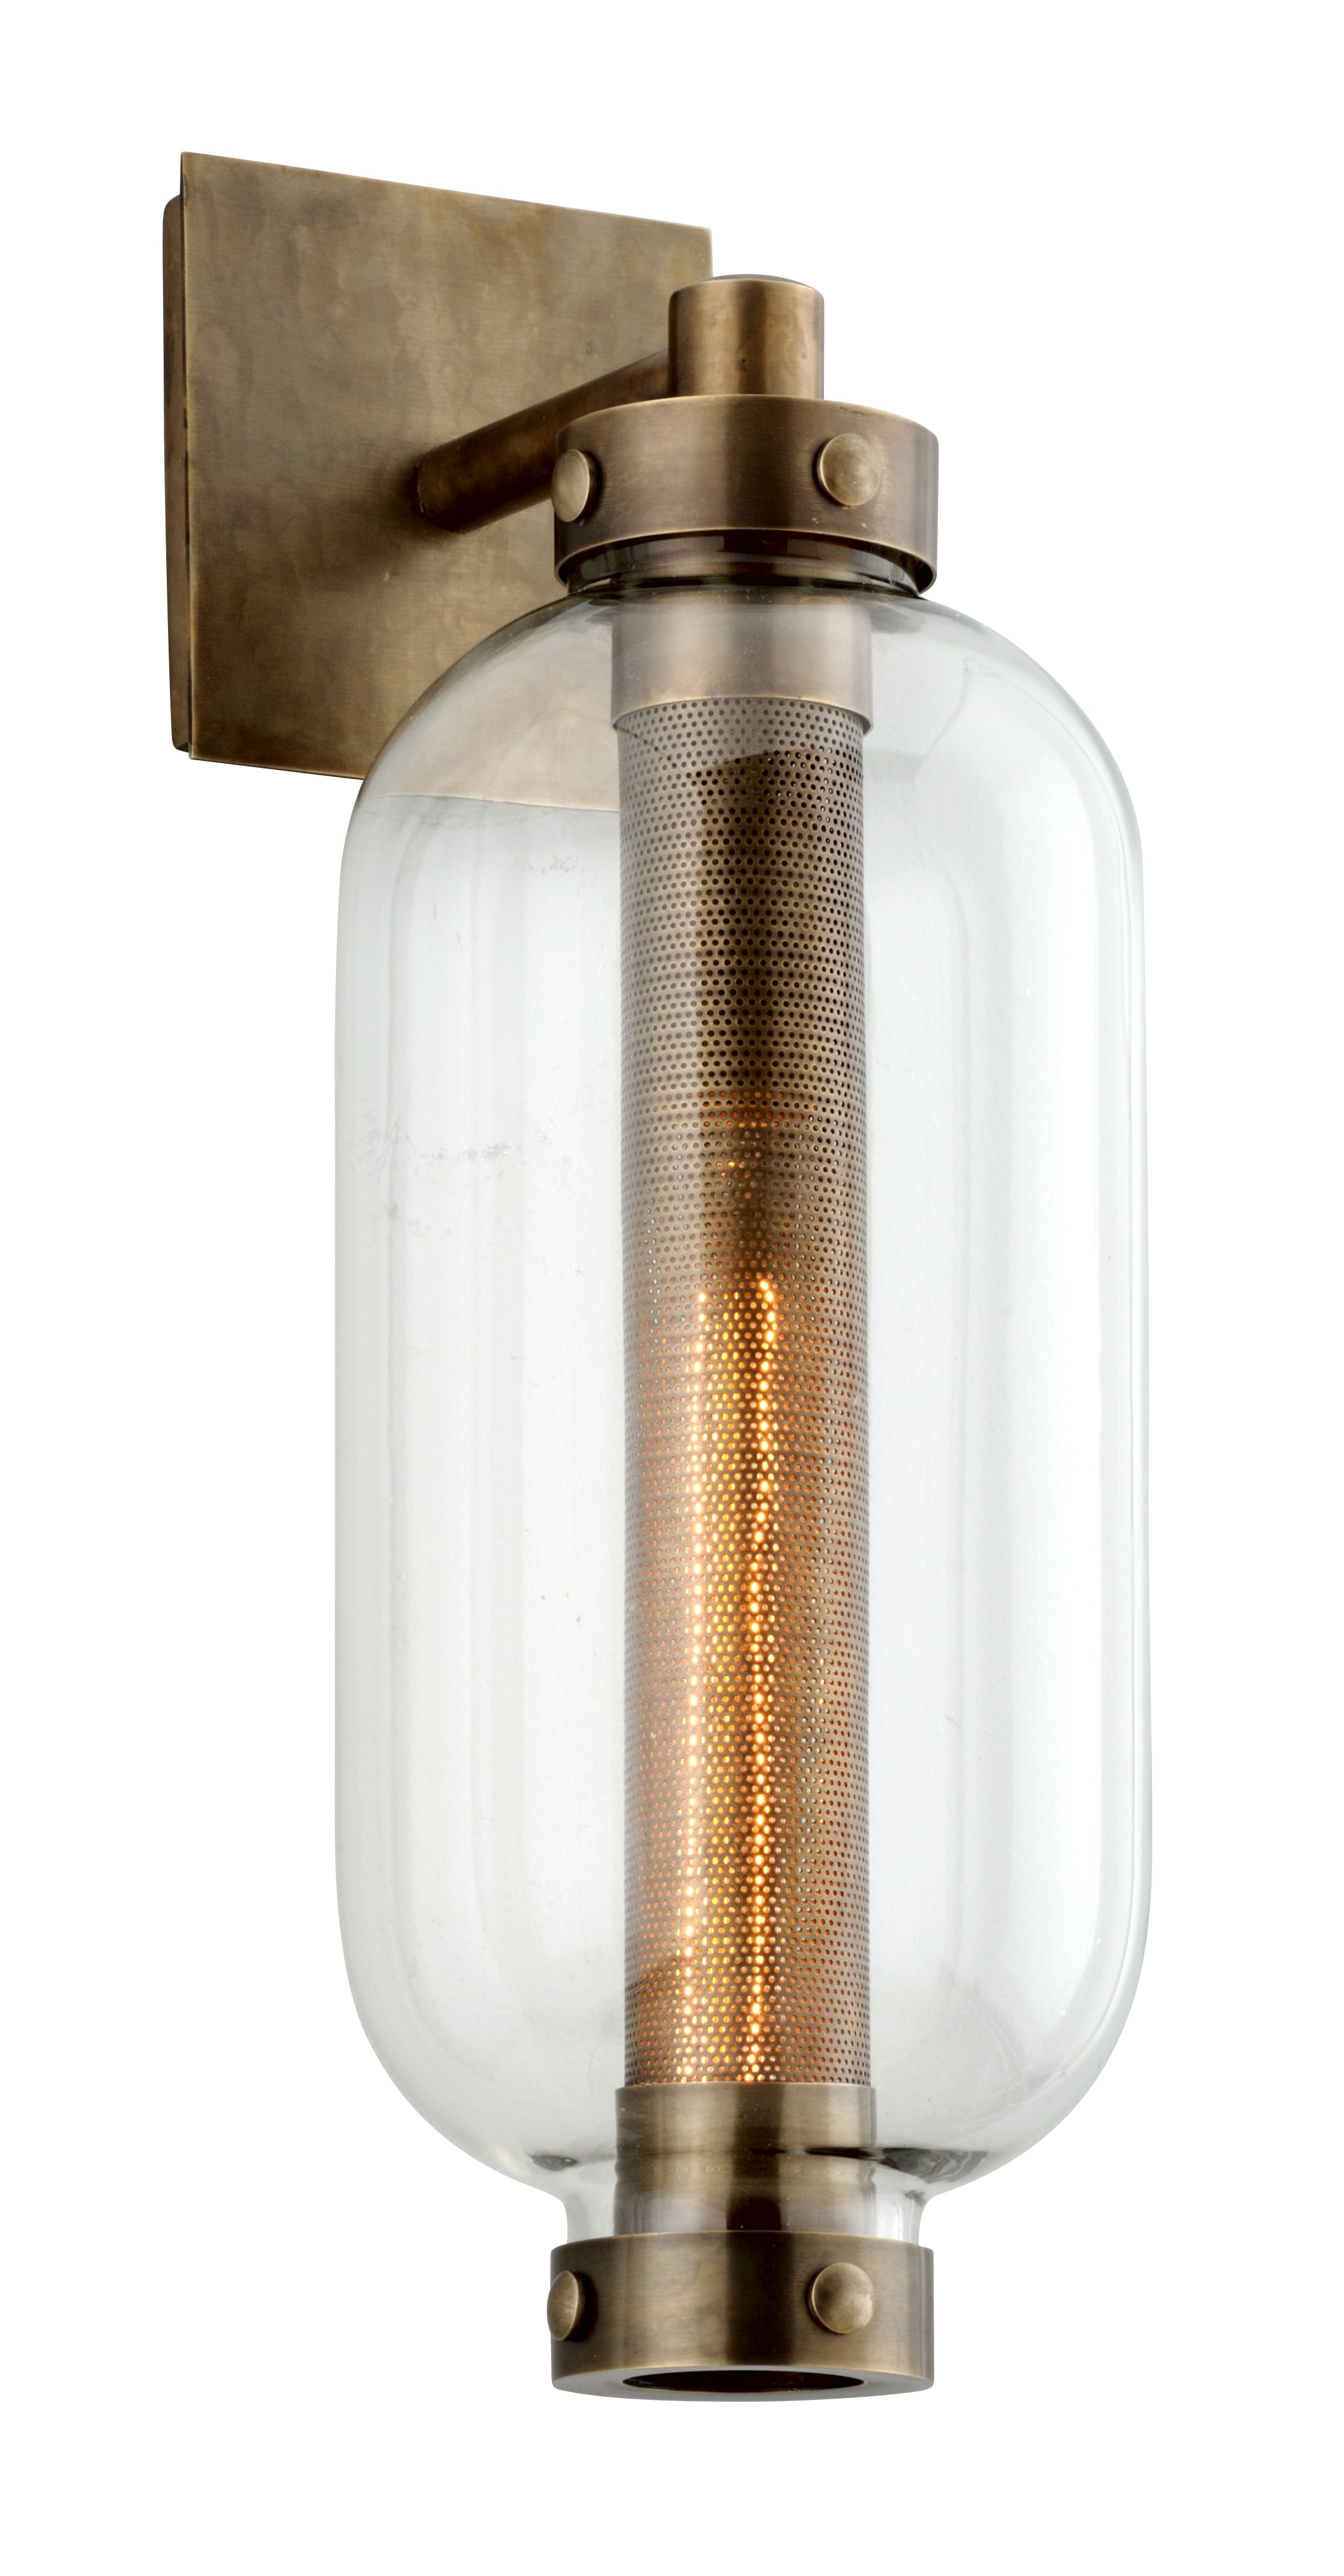 Troy Lighting ATWATER 1LT WALL B7031 Outdoor l Wall Troy Lighting VINTAGE BRASS  